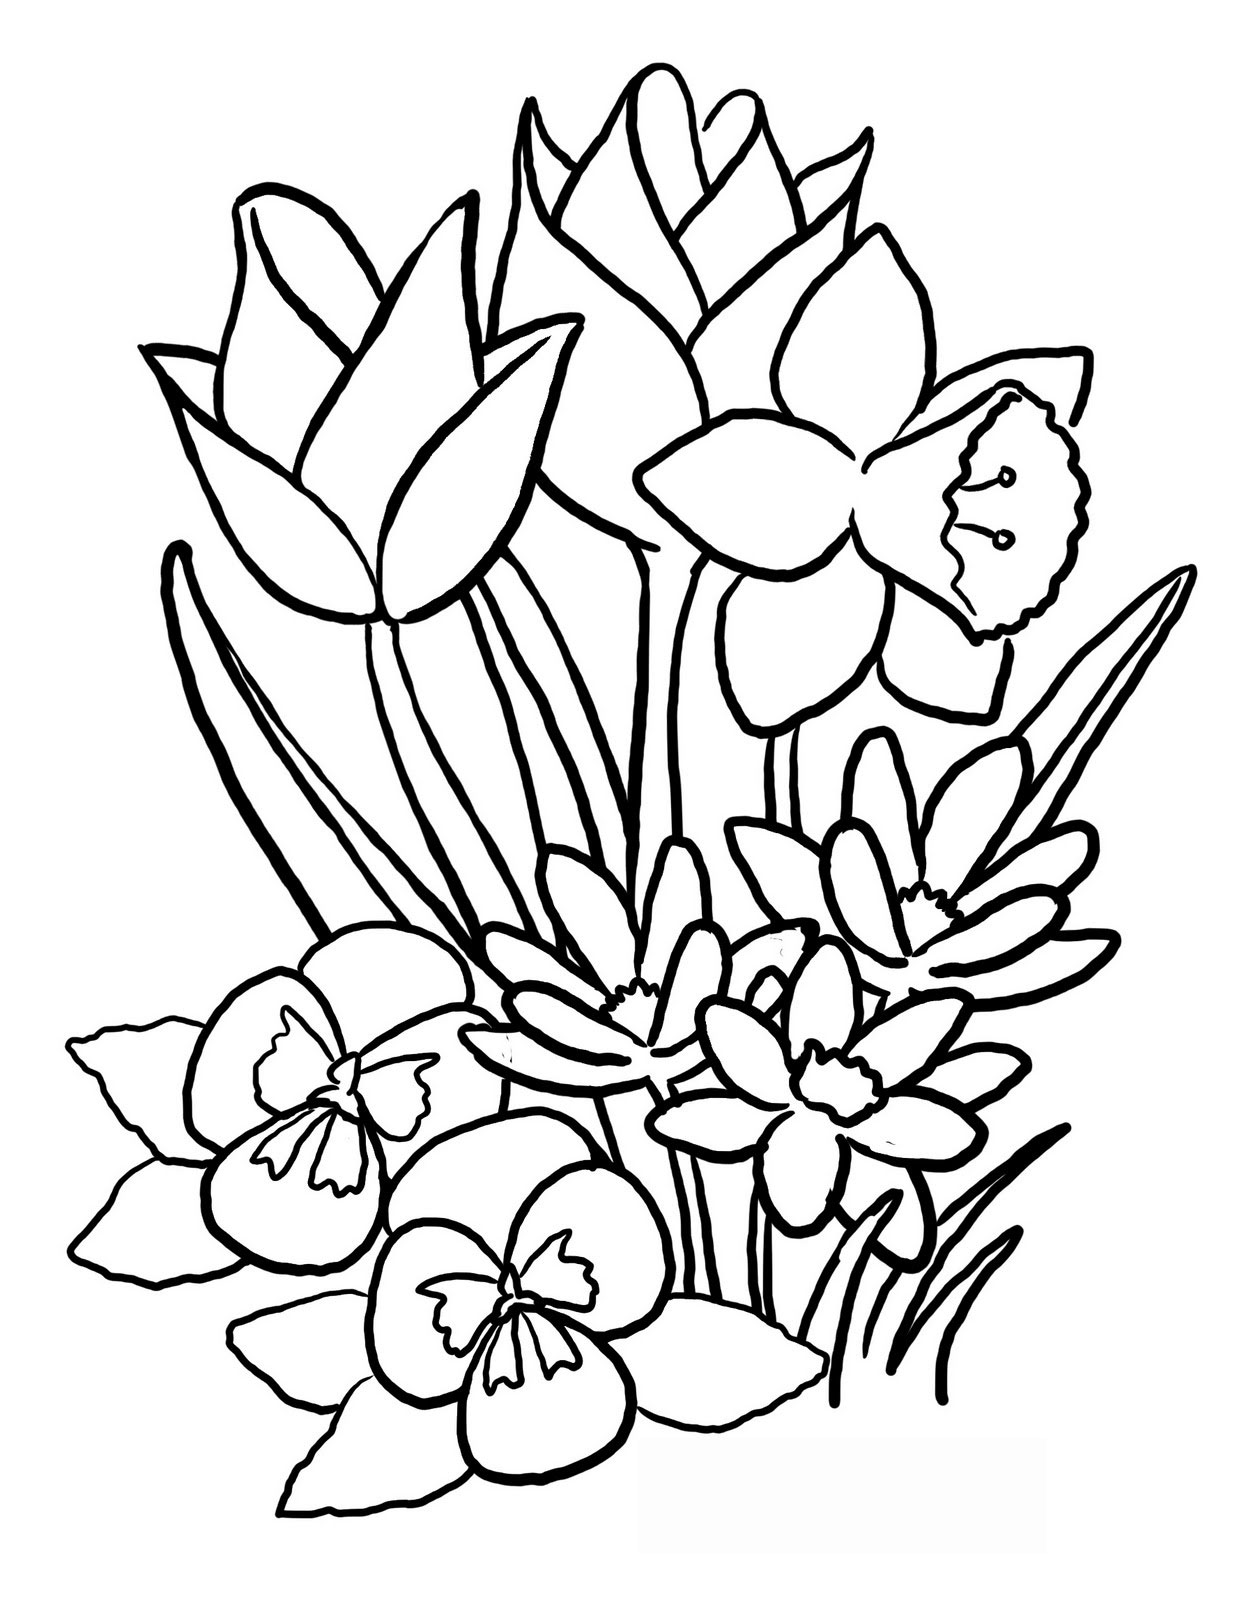 Free Drawing Of Spring Flowers, Download Free Clip Art, Free